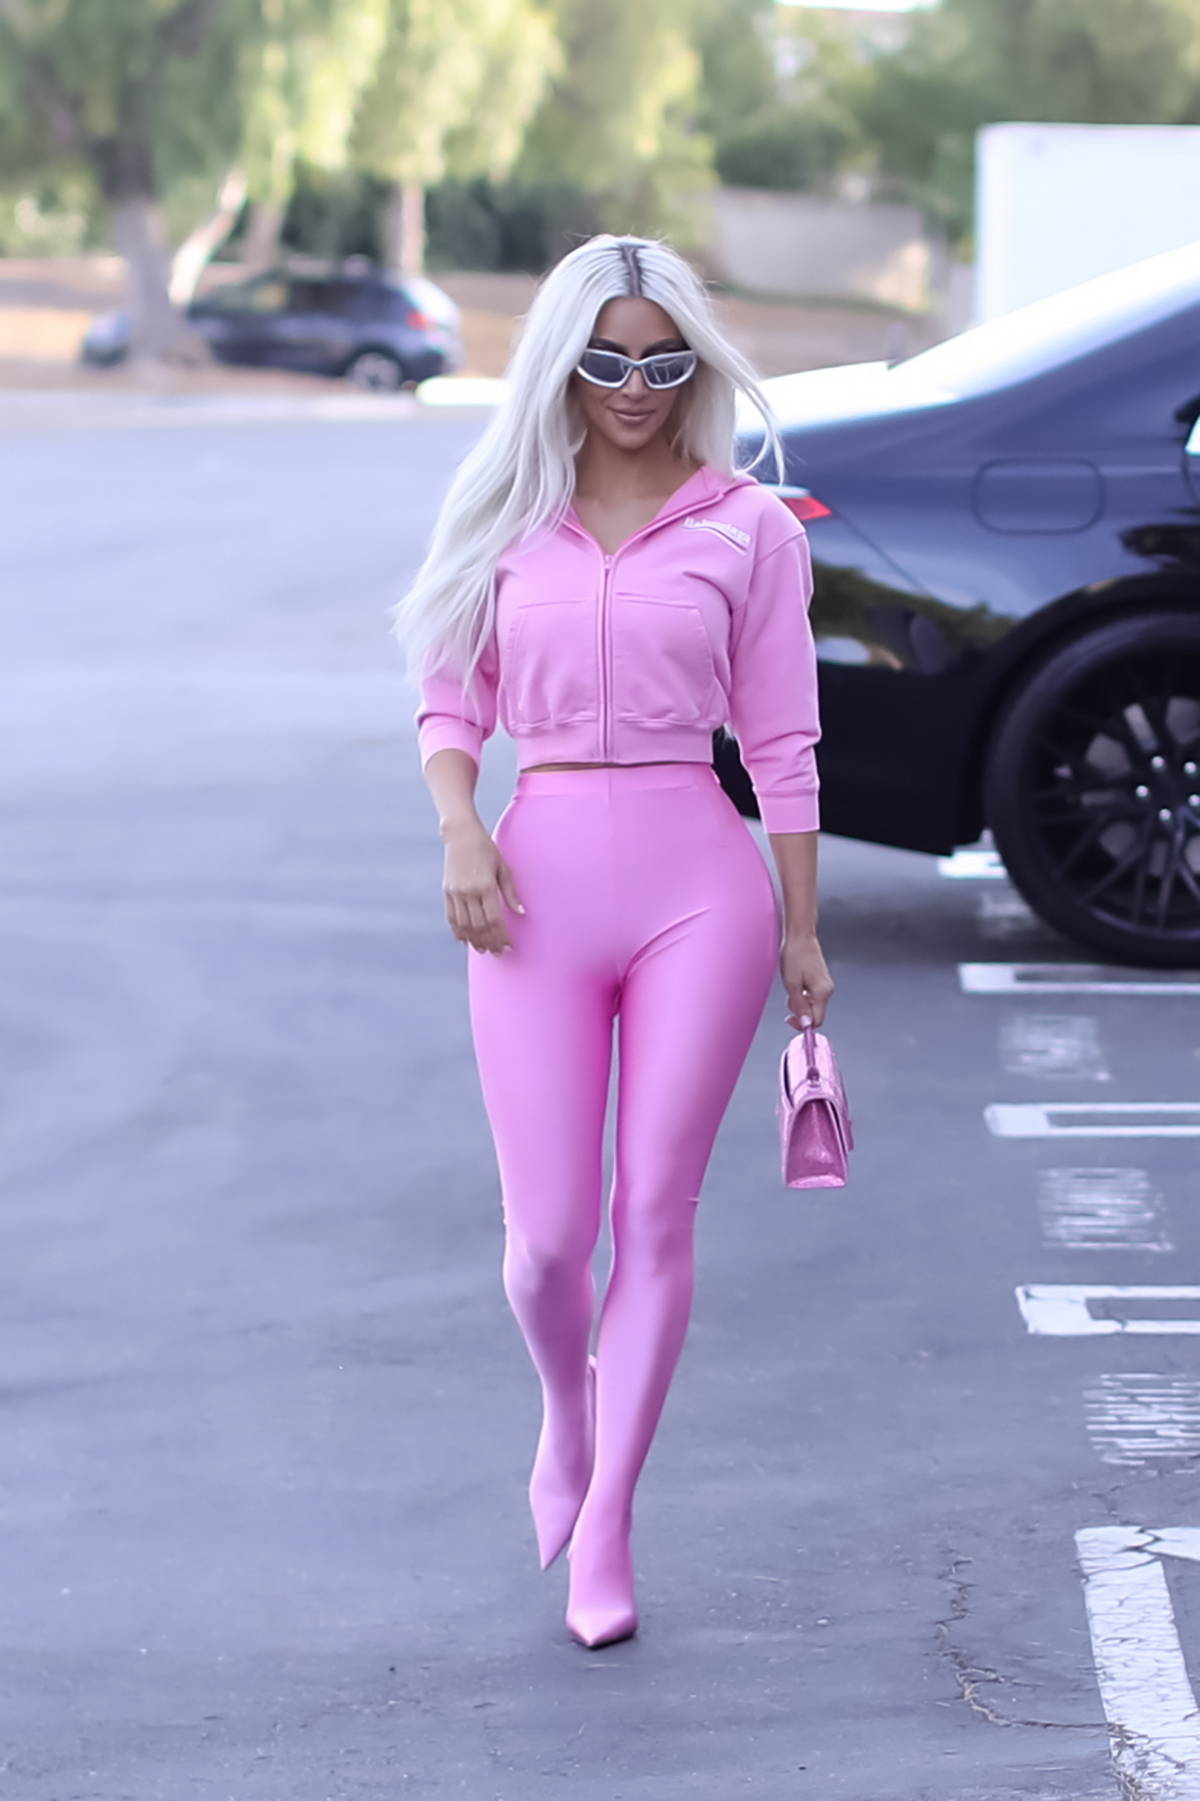 https://www.celebsfirst.com/wp-content/uploads/2022/05/kim-kardashian-stuns-in-pink-as-she-leaves-a-skims-photoshoot-and-heads-to-ripleys-believe-it-or-not-on-hollywood-blvd-california-280522_14.jpg